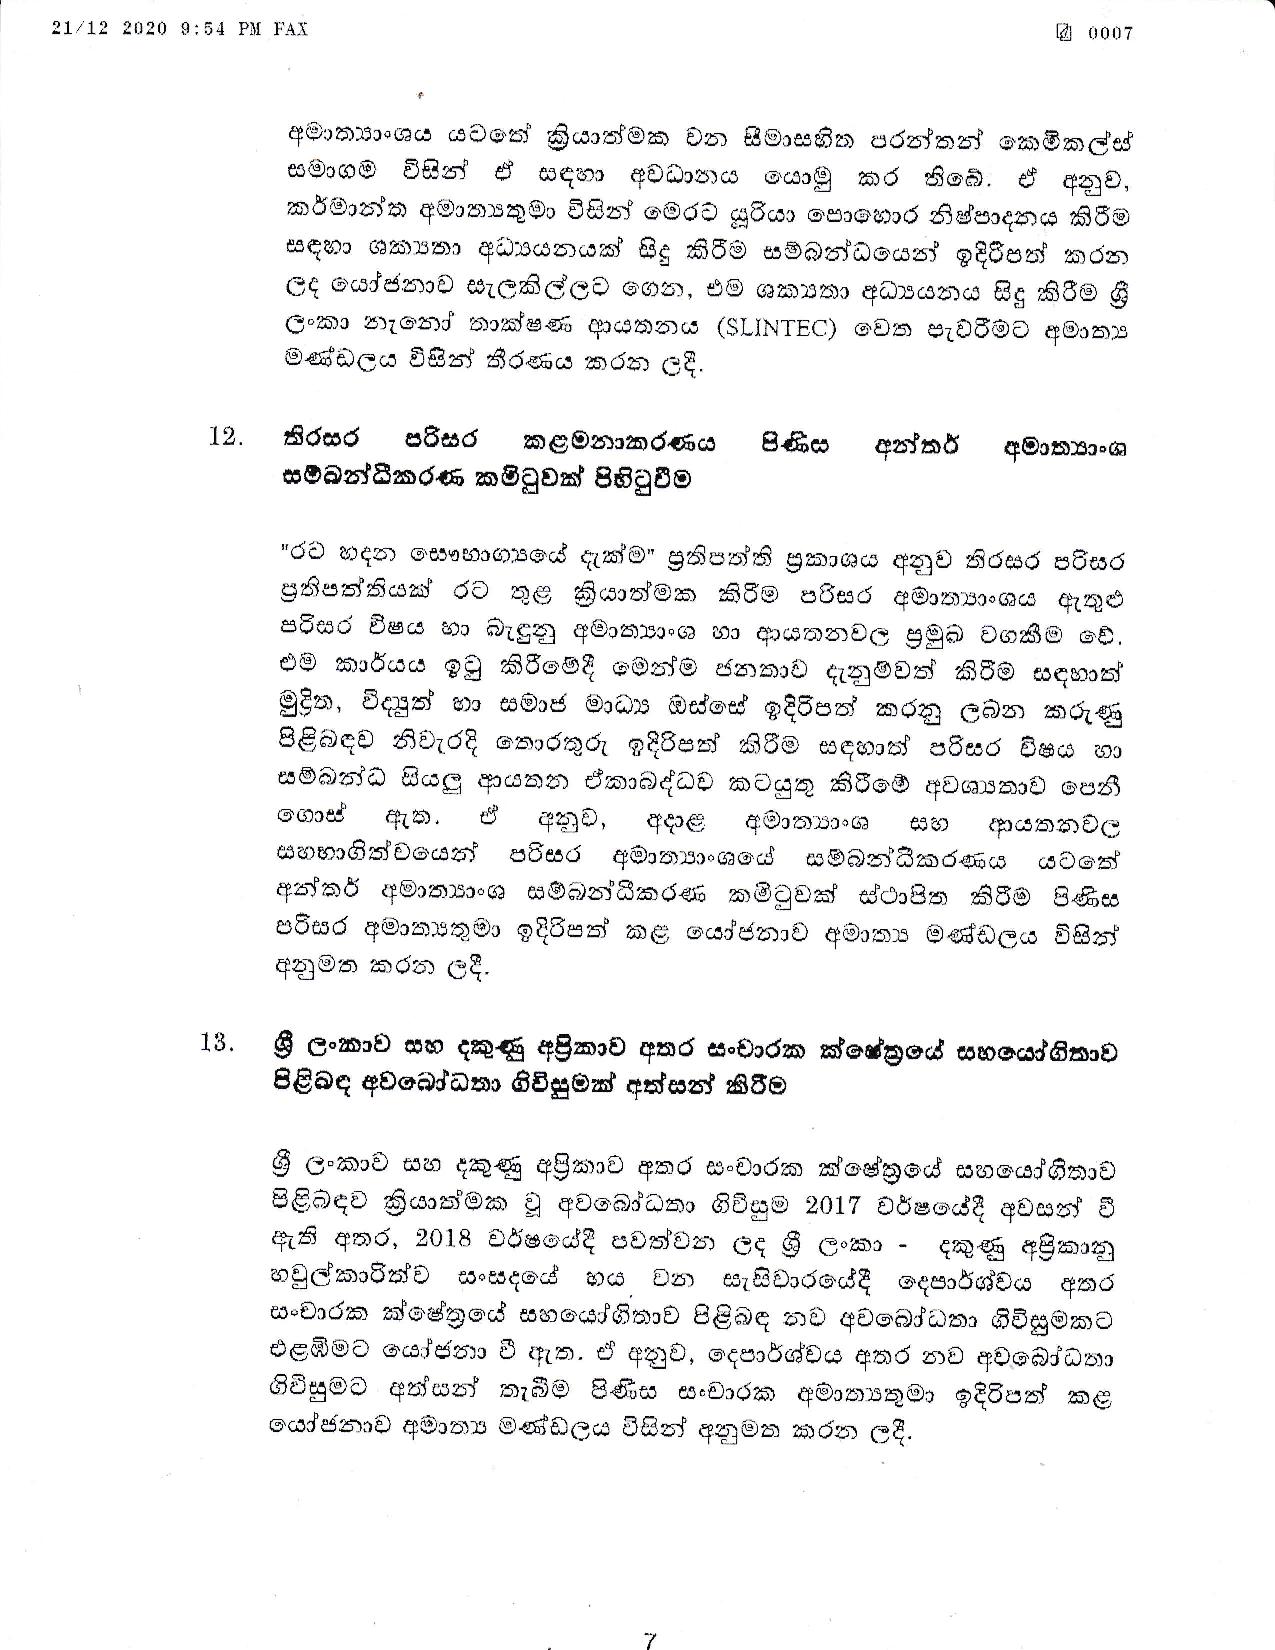 Cabinet Decision on 21.12.2020 page 007